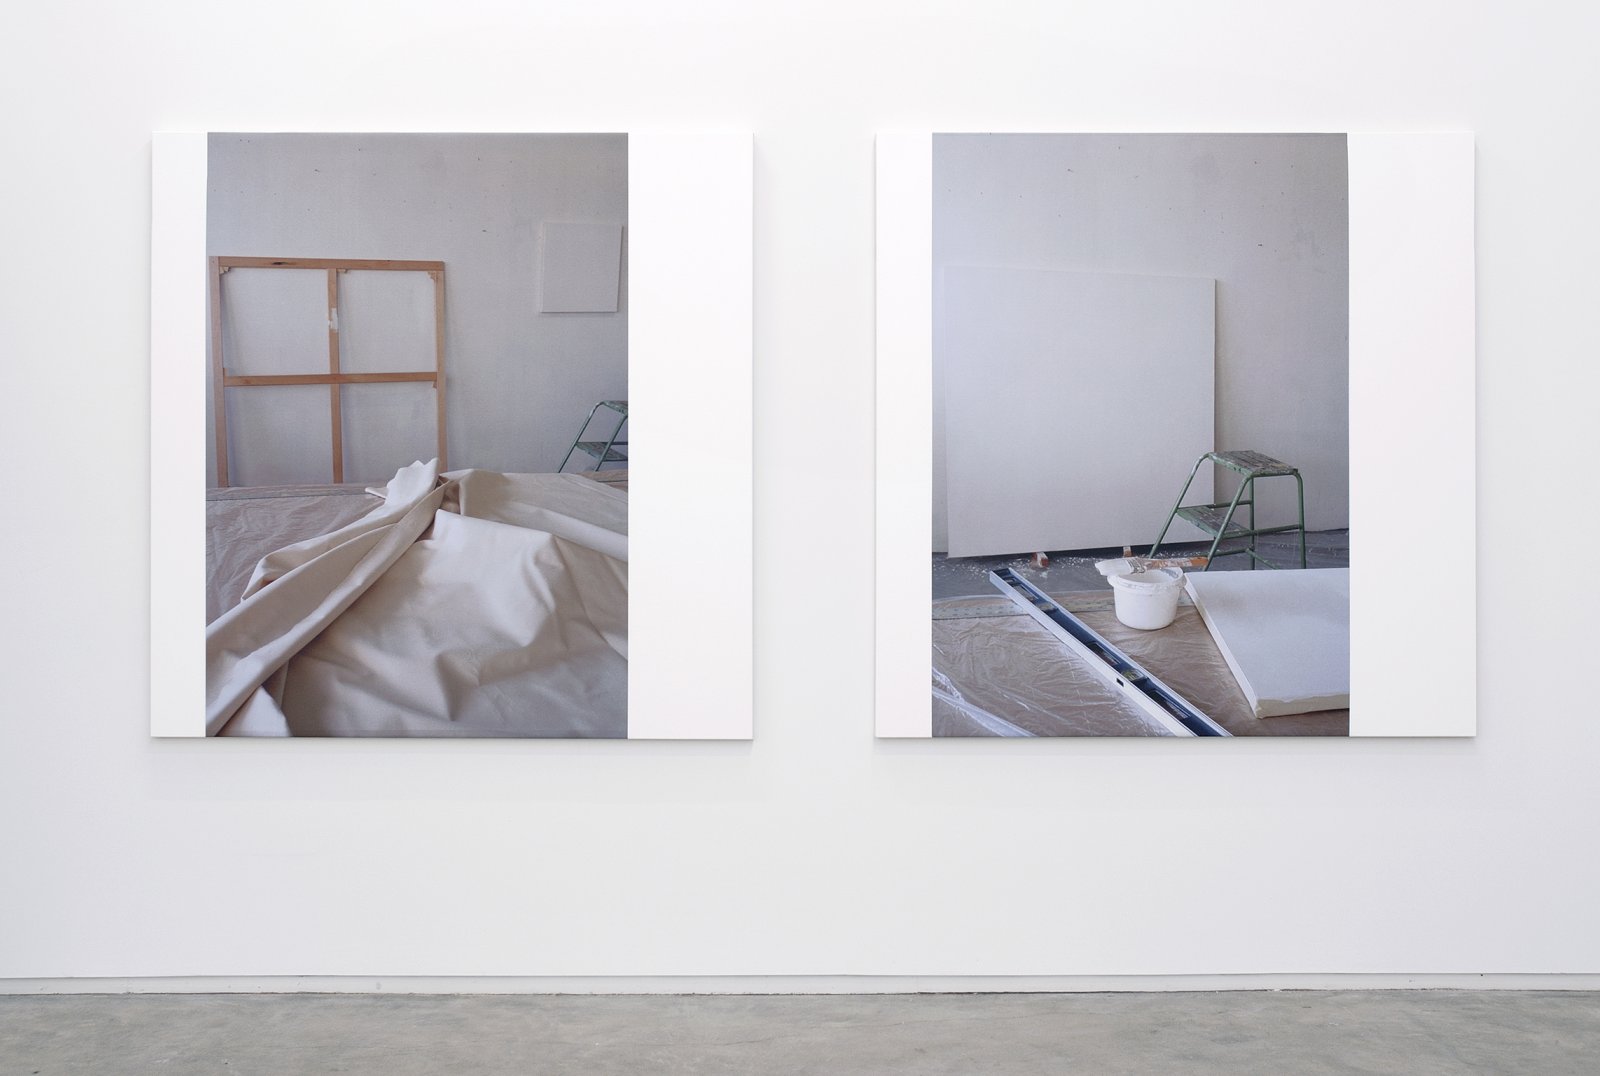 Ian Wallace, Support/Surface I, II, 2007, 2 photolaminate and acrylic on canvas, each 60 x 60 in. (152 x 152 cm)